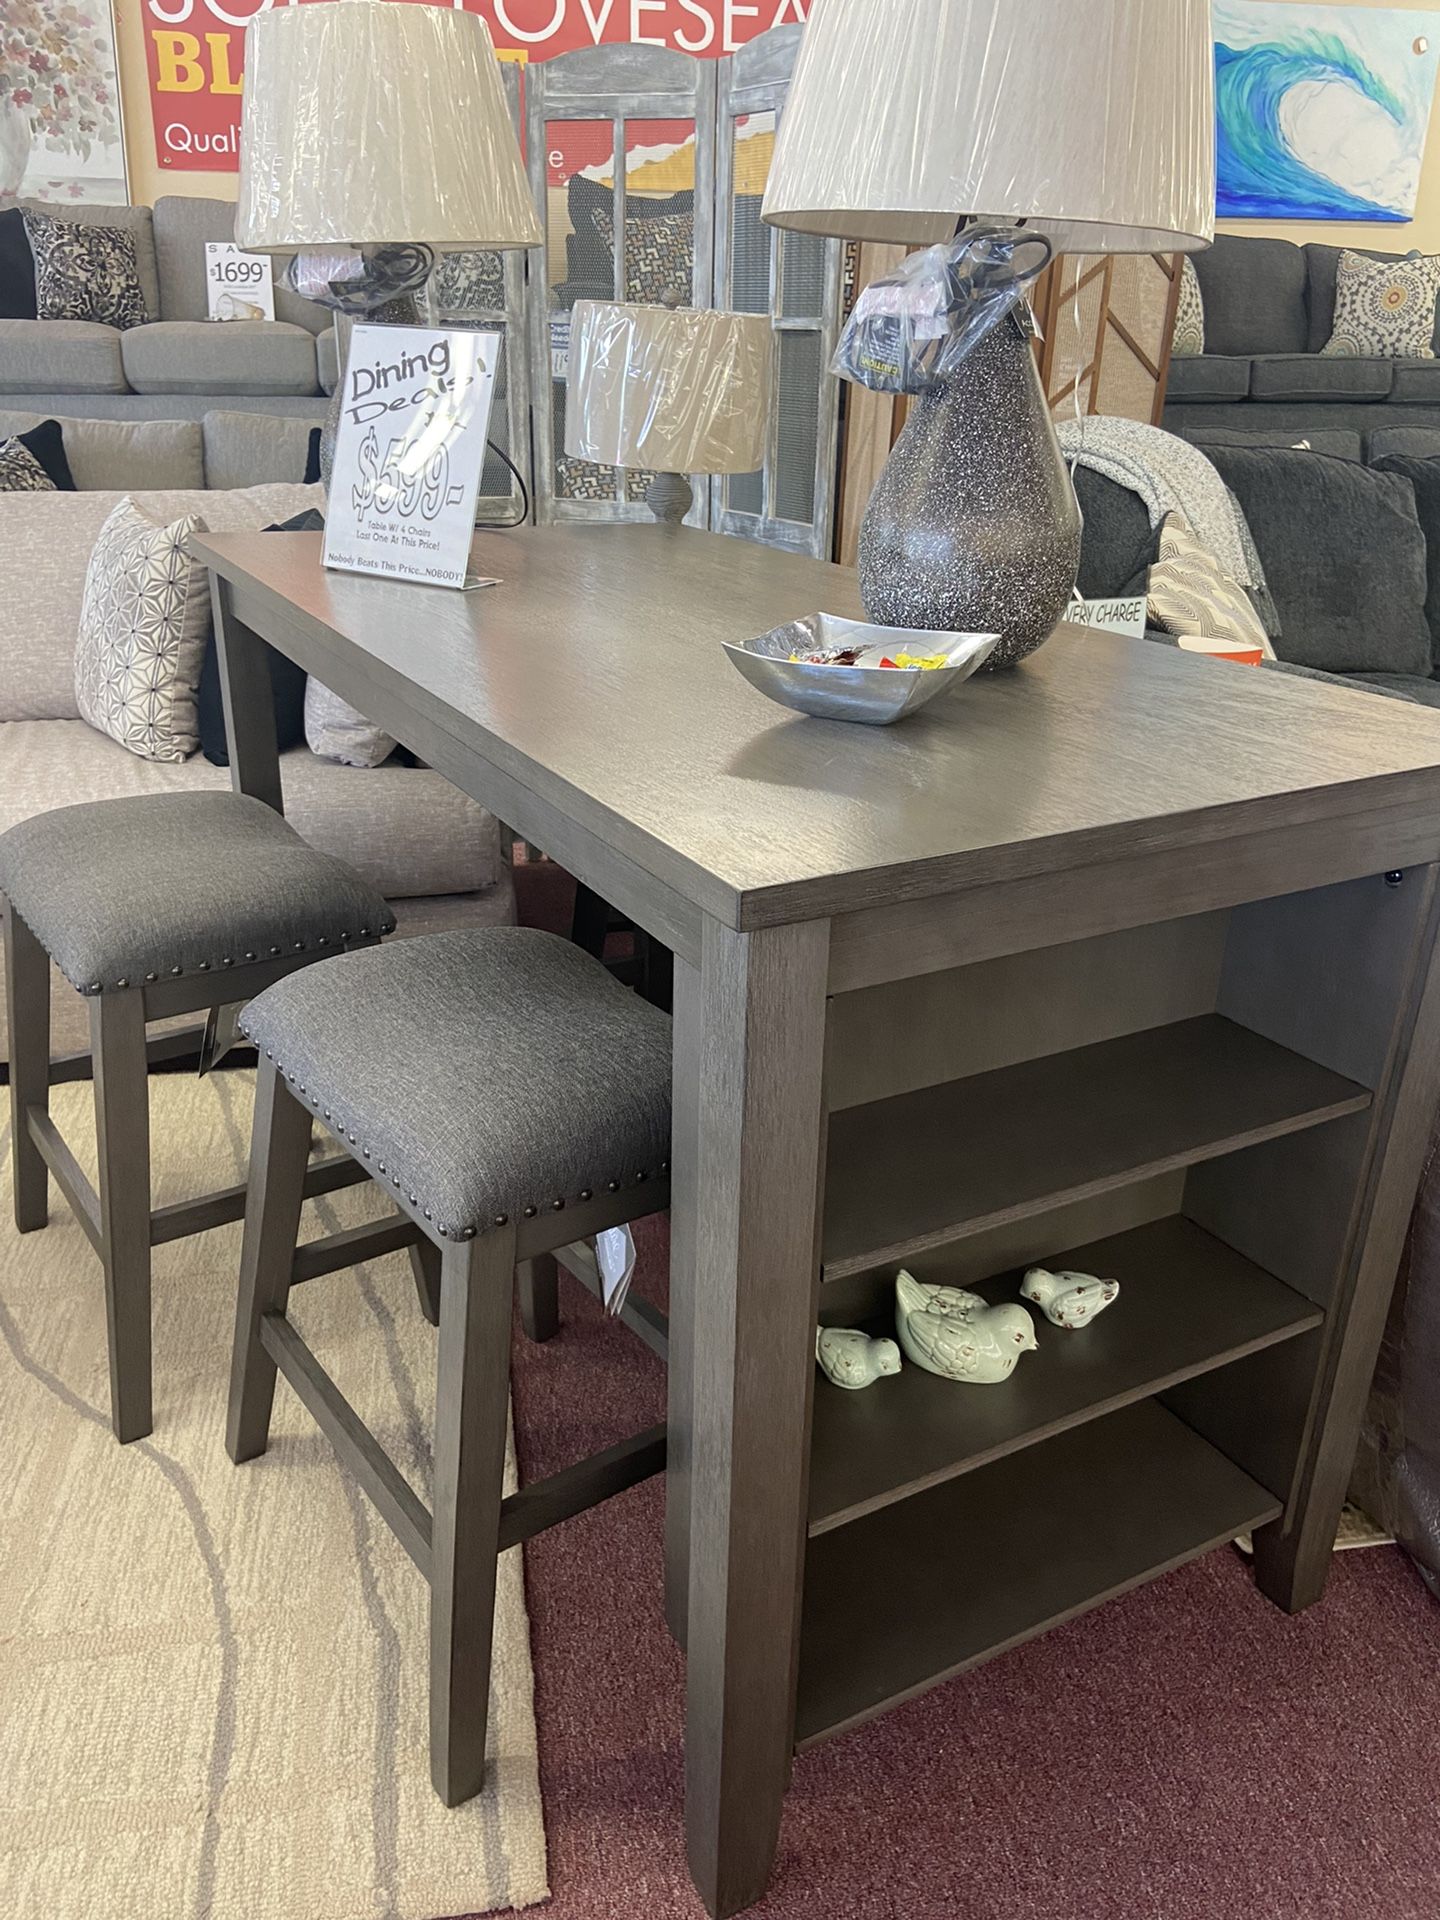 Storage Dinette With 4 Stools ❤️❤️$50 Down Takes Home